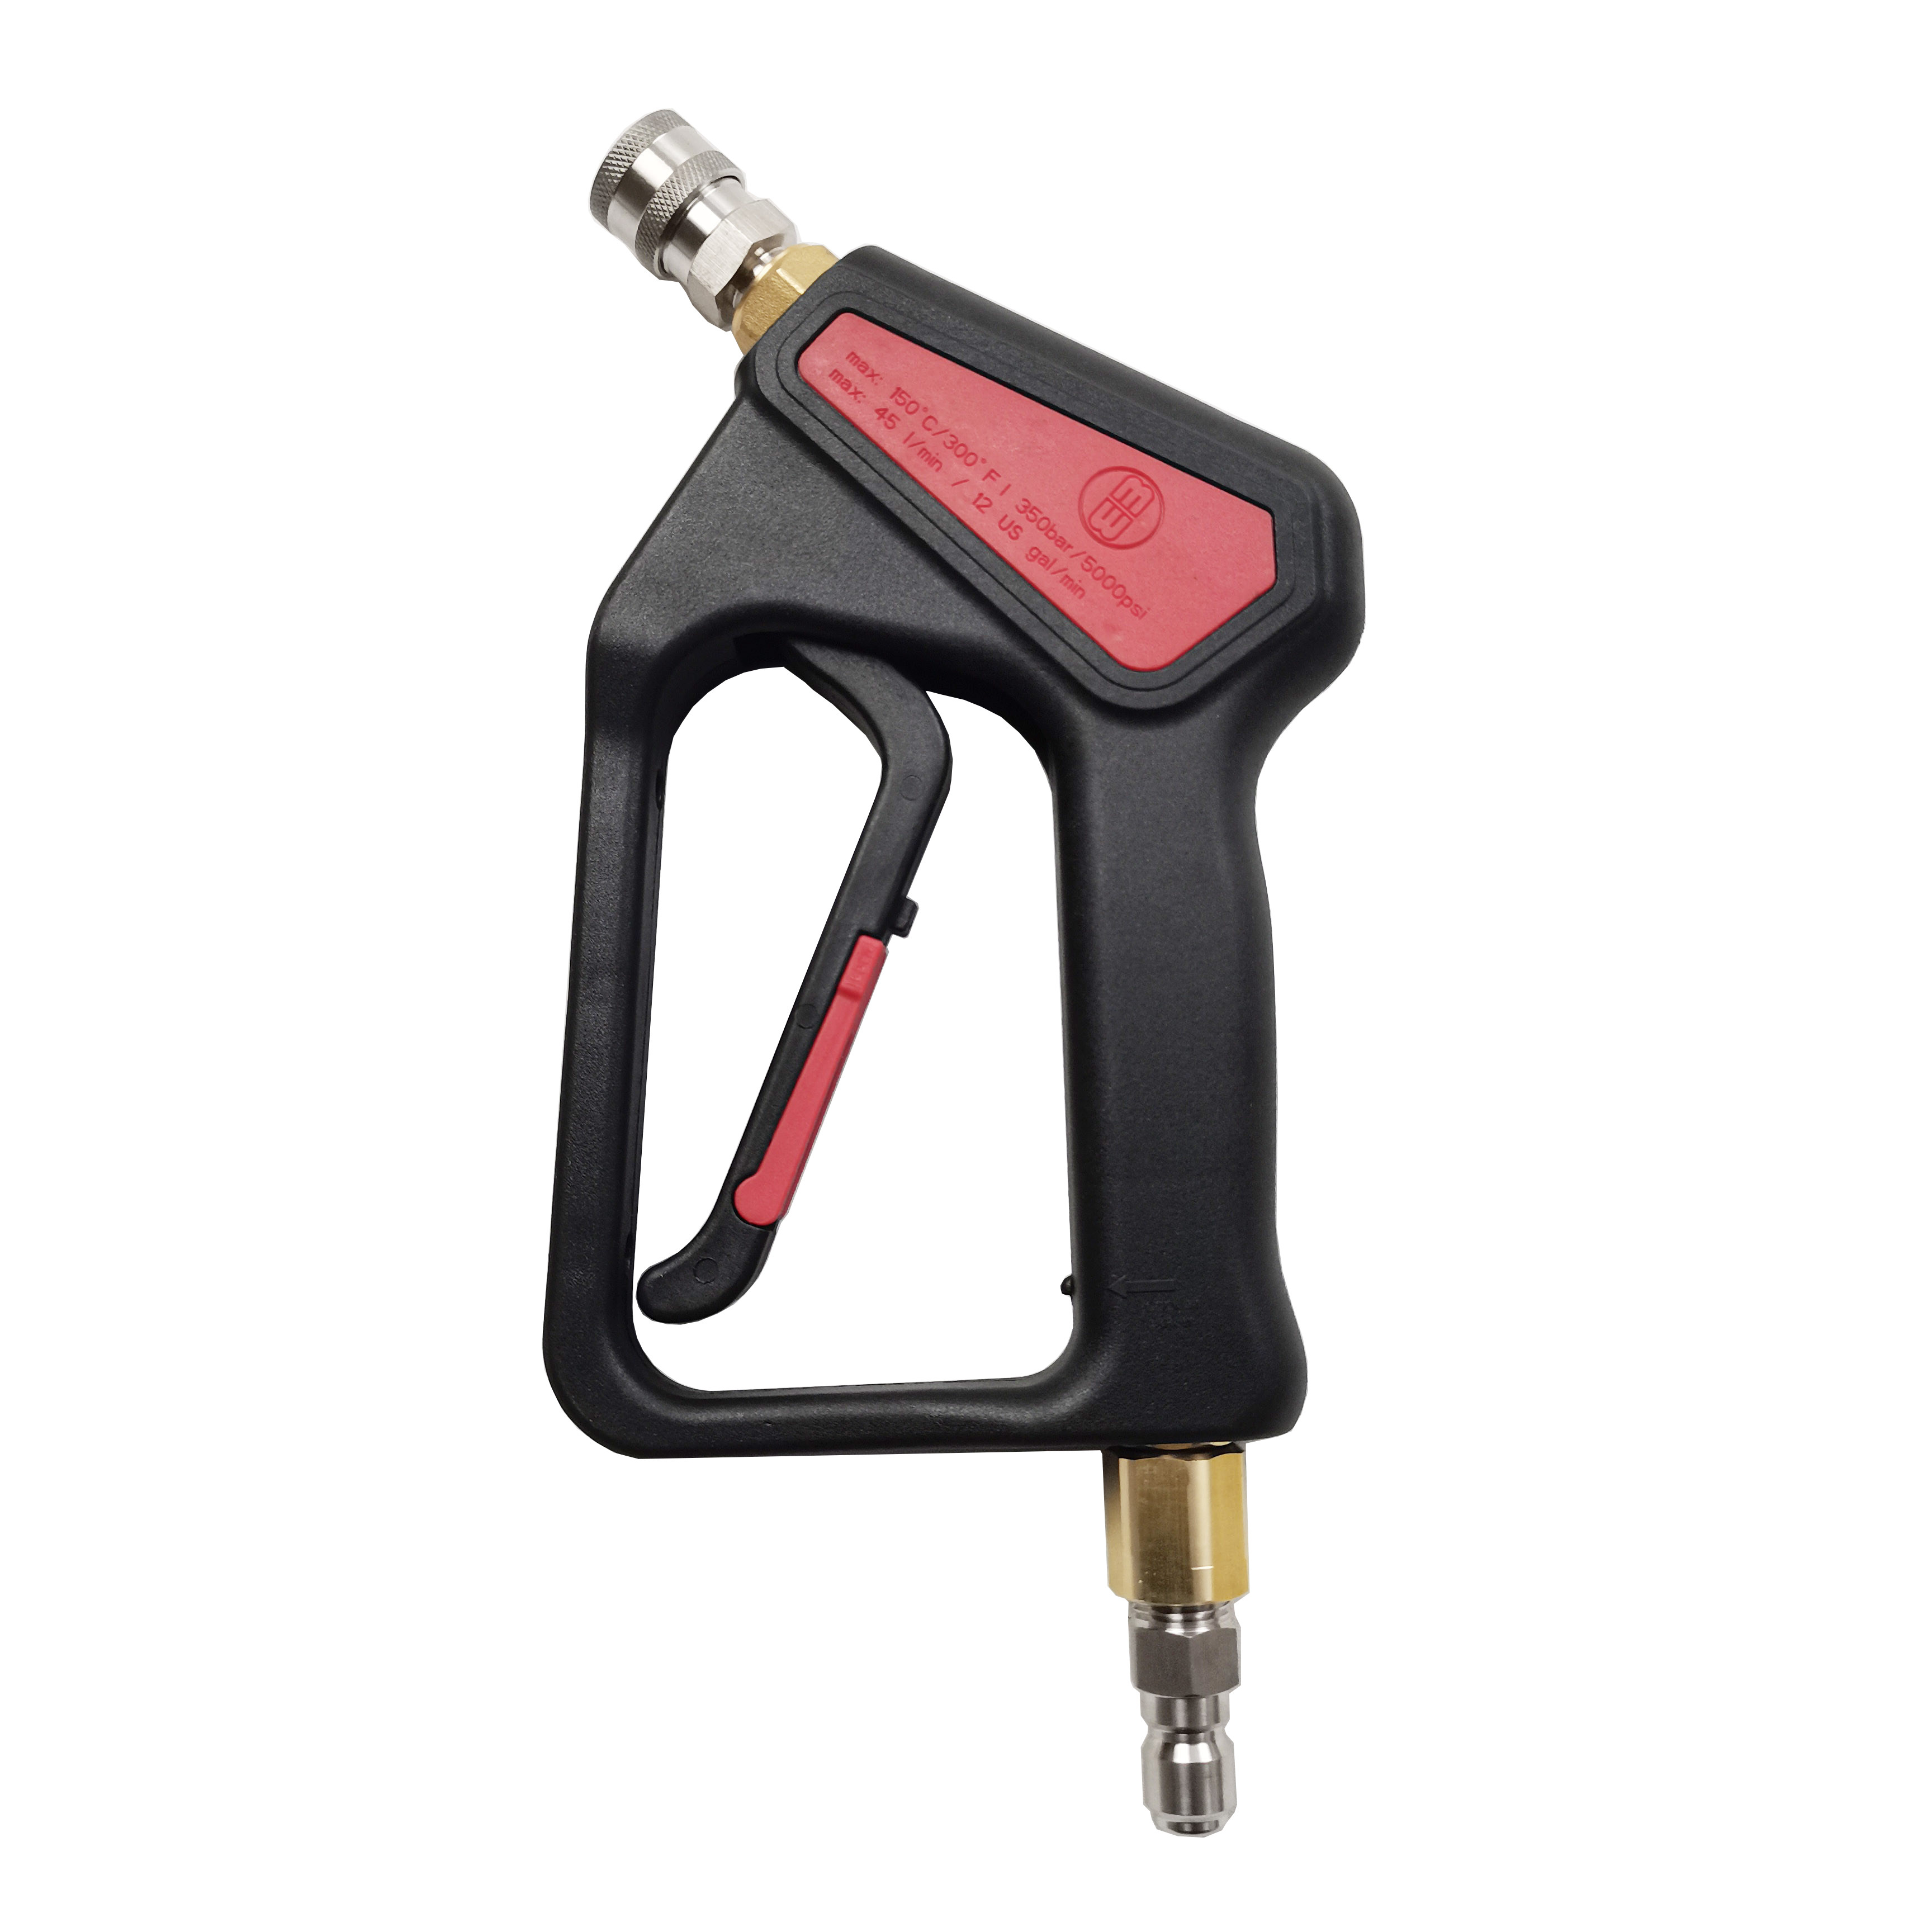 High Pressure Washer Trigger Gun with Swivel and Fitting TG5001SS-CS107-PS105